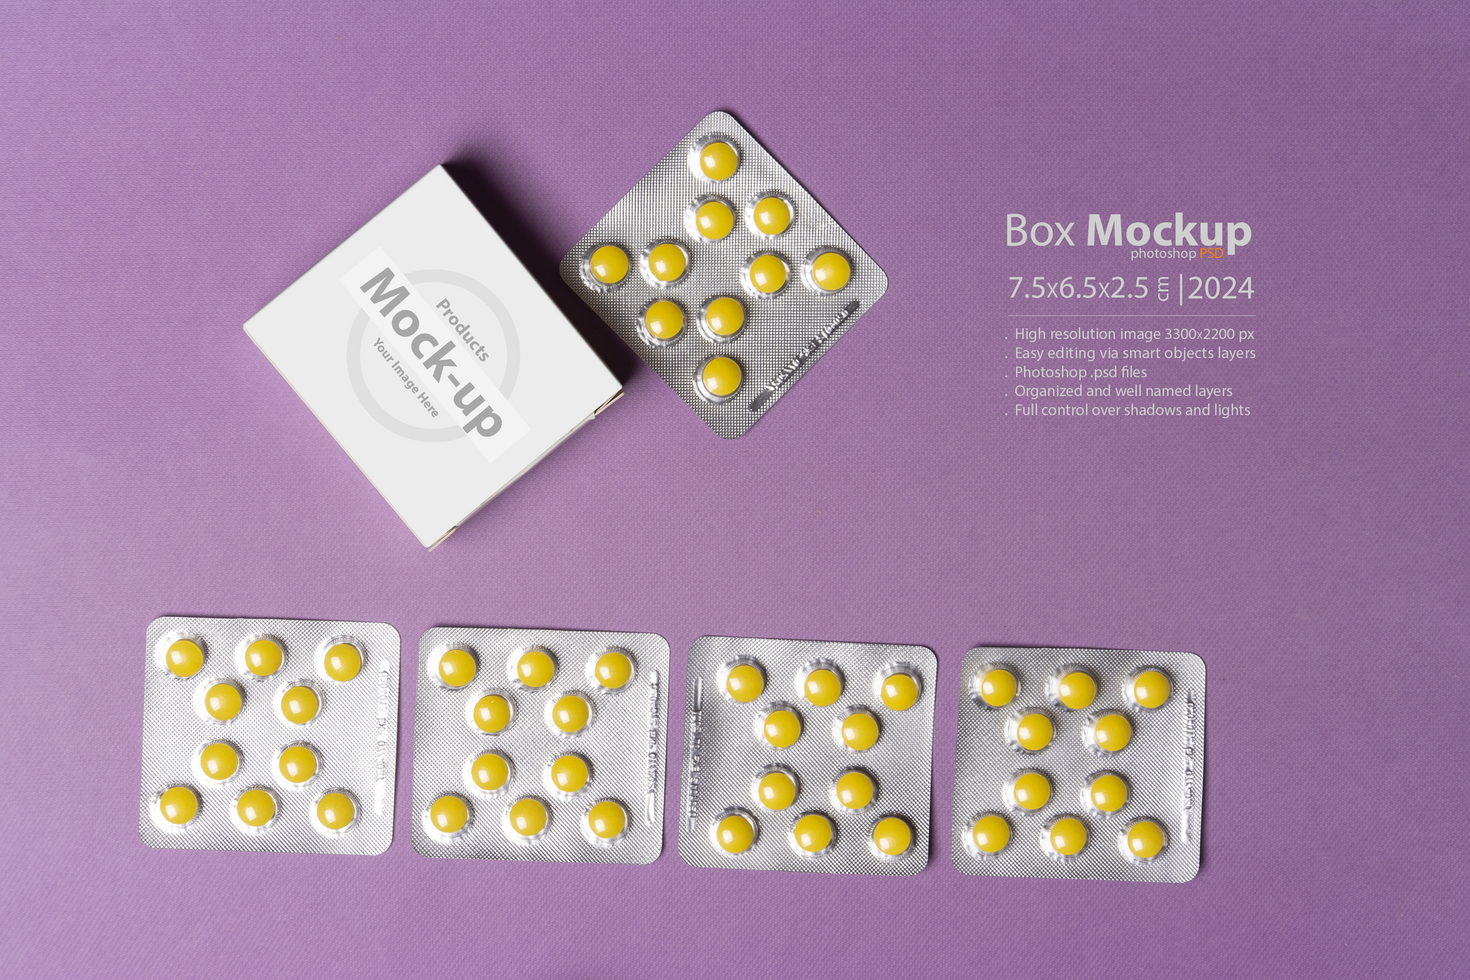 Pills tablets beside box in front of purple background mock-up series psd